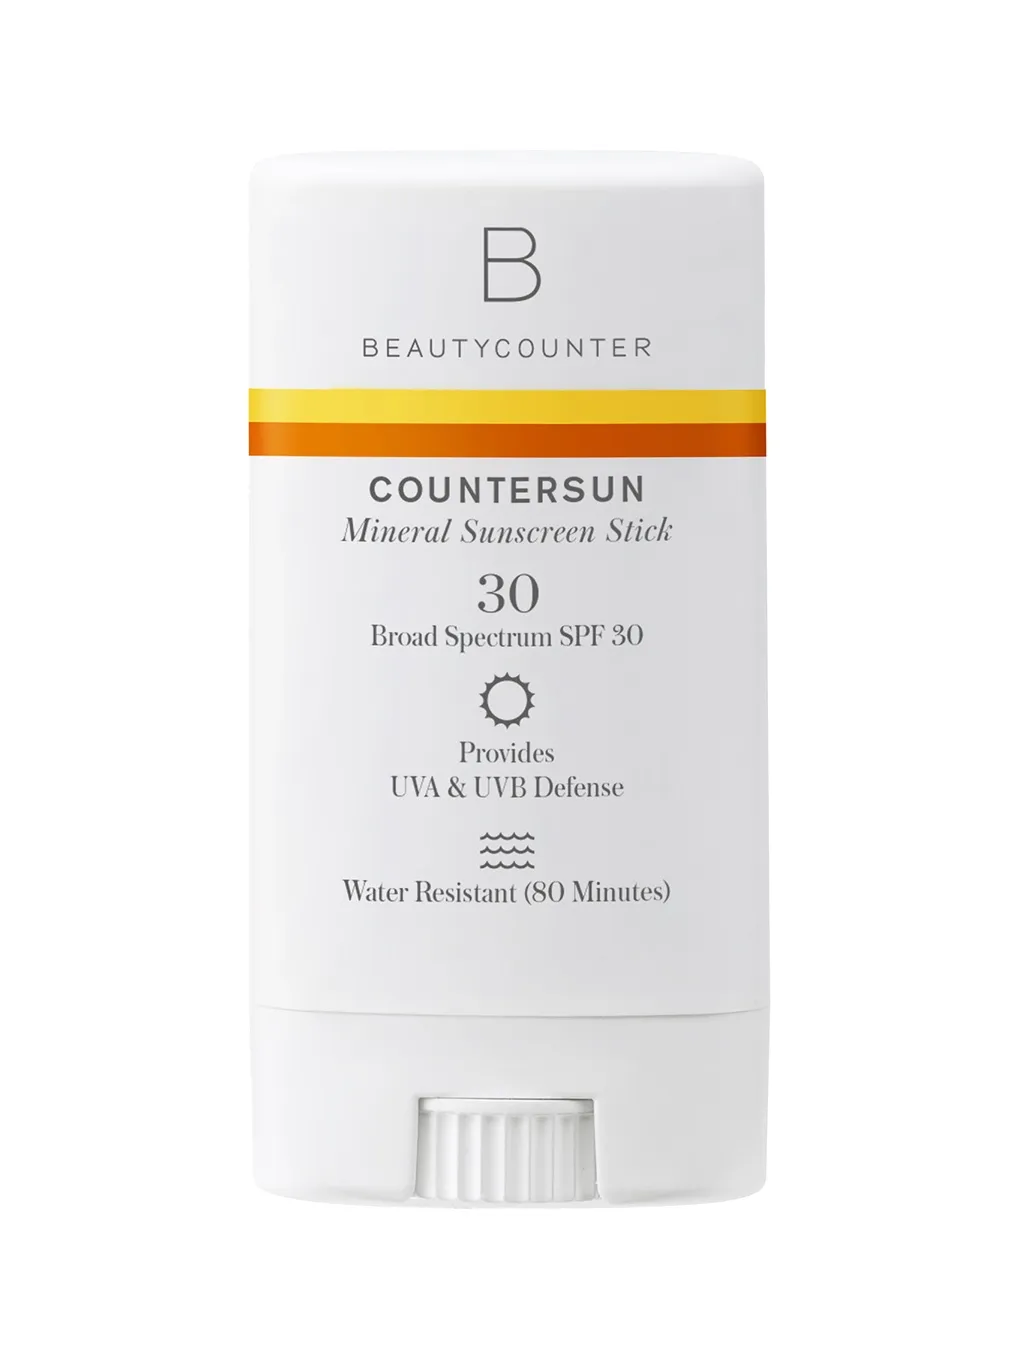 A tube of Beautycounter mineral sunscreen stick.